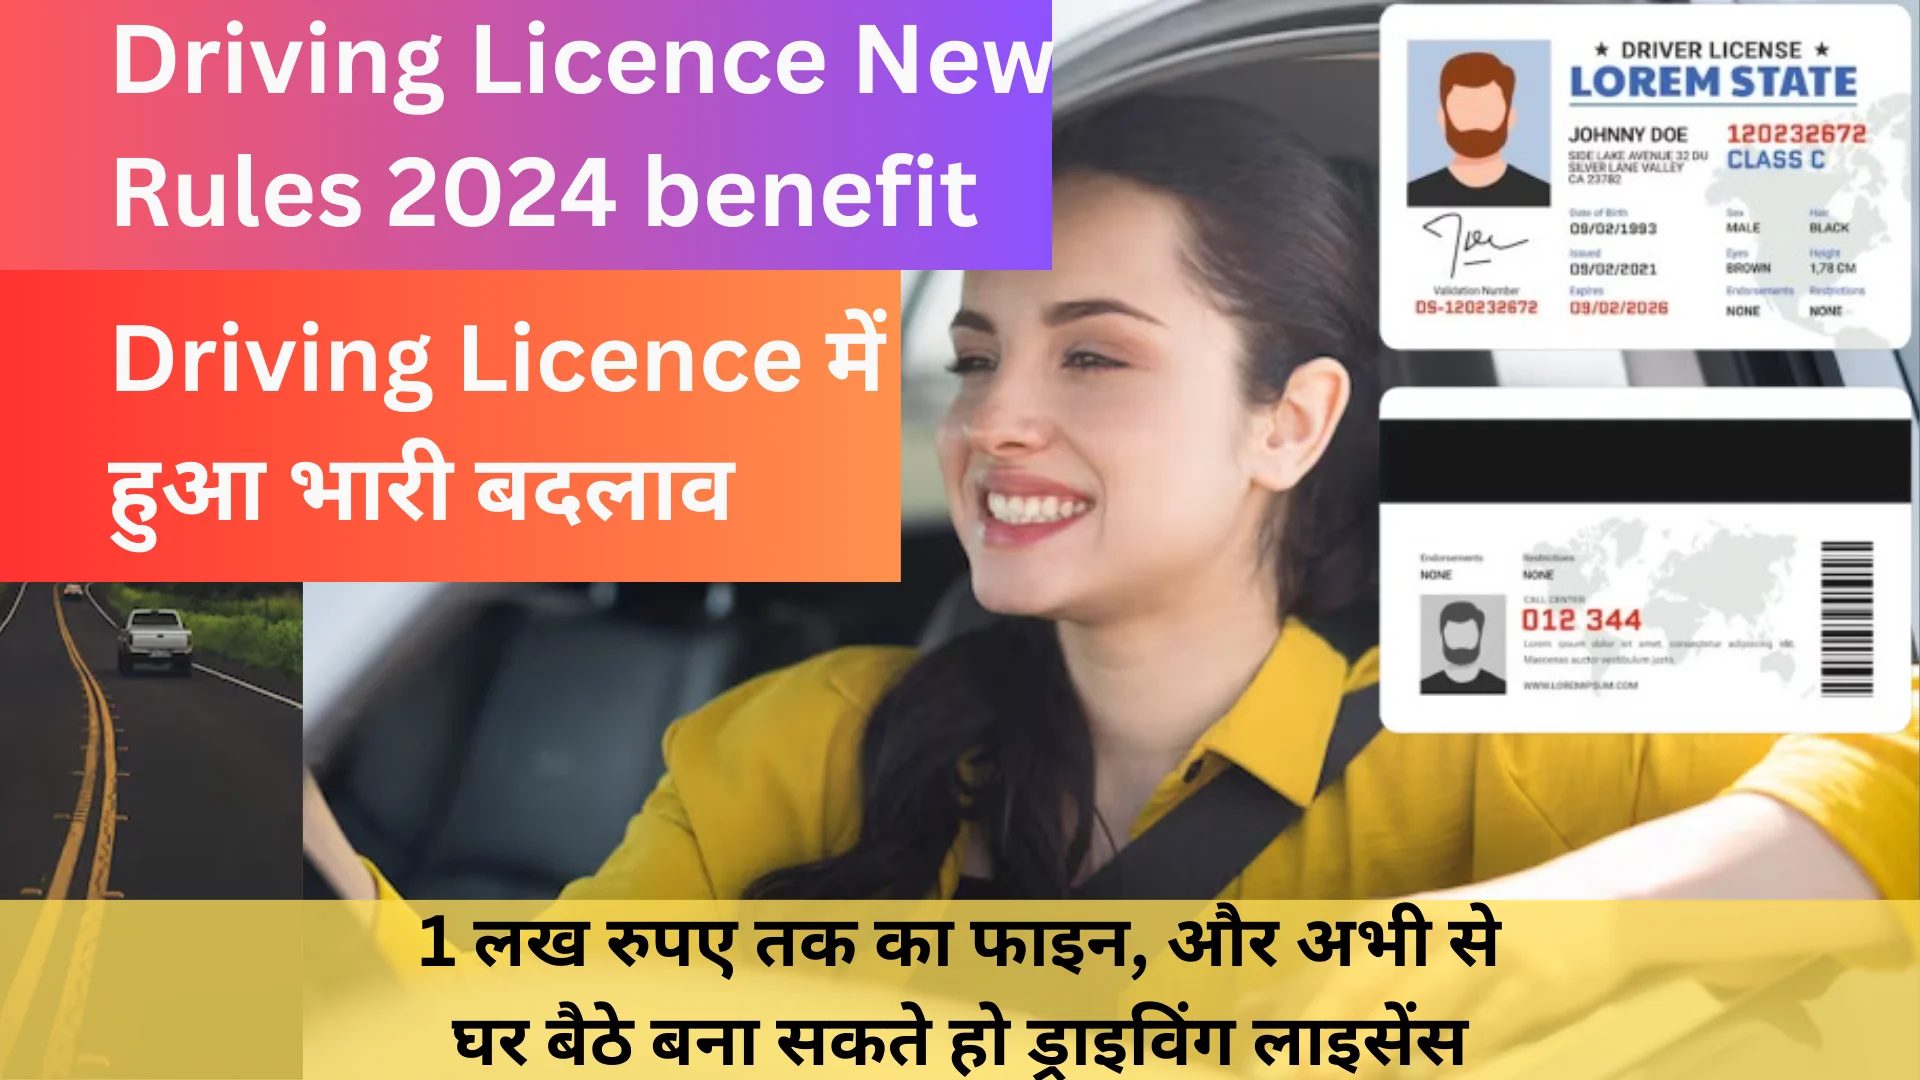 Driving Licence New Rules 2024